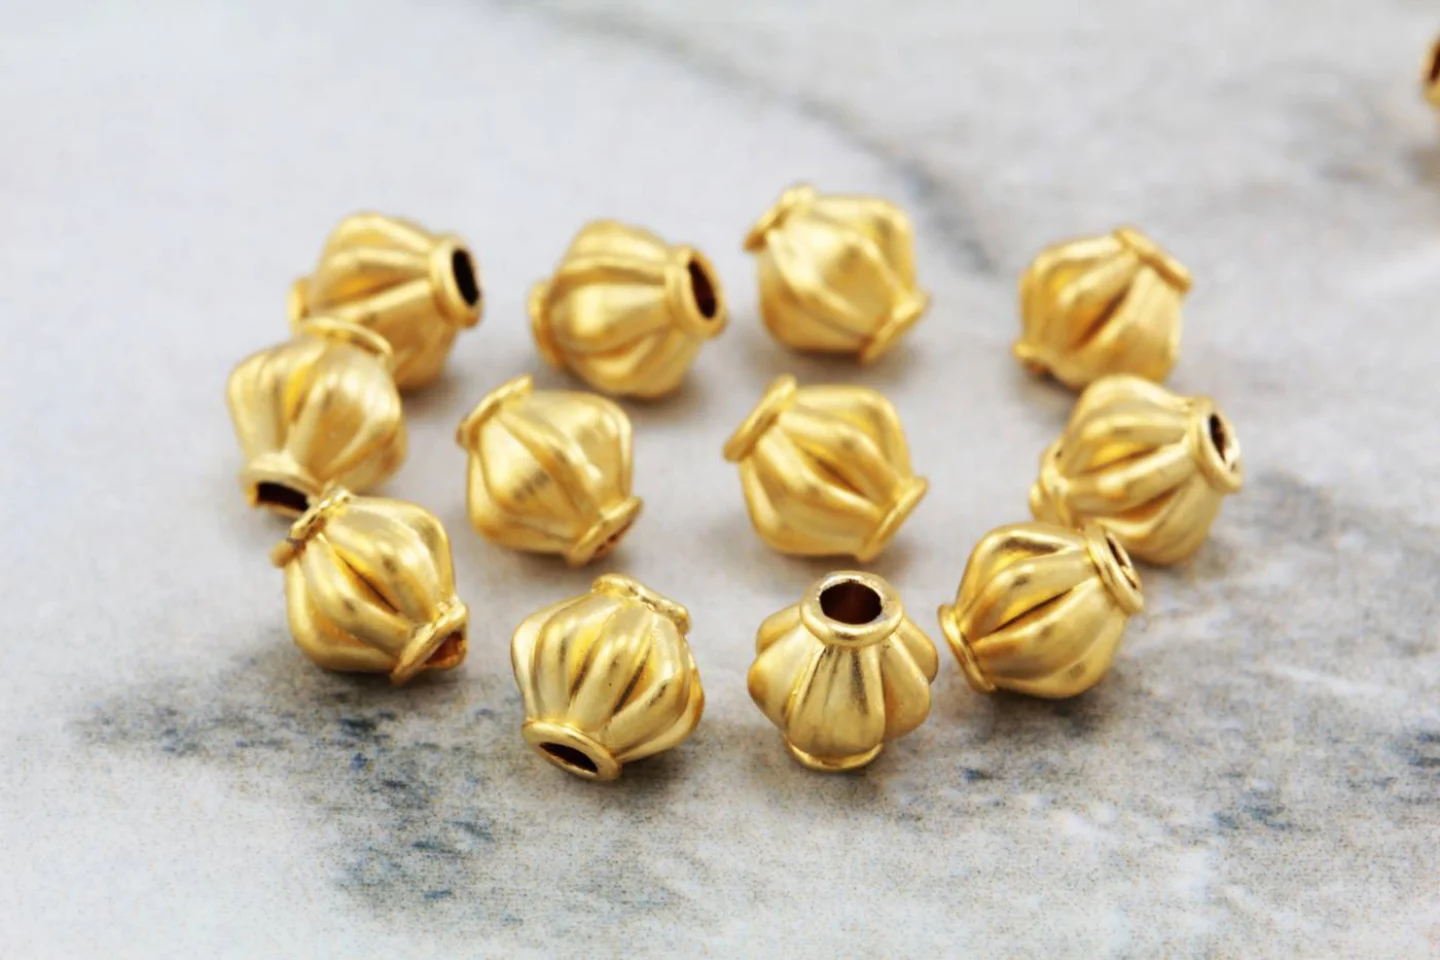 gold-plated-6mm-round-shape-spacer-beads.